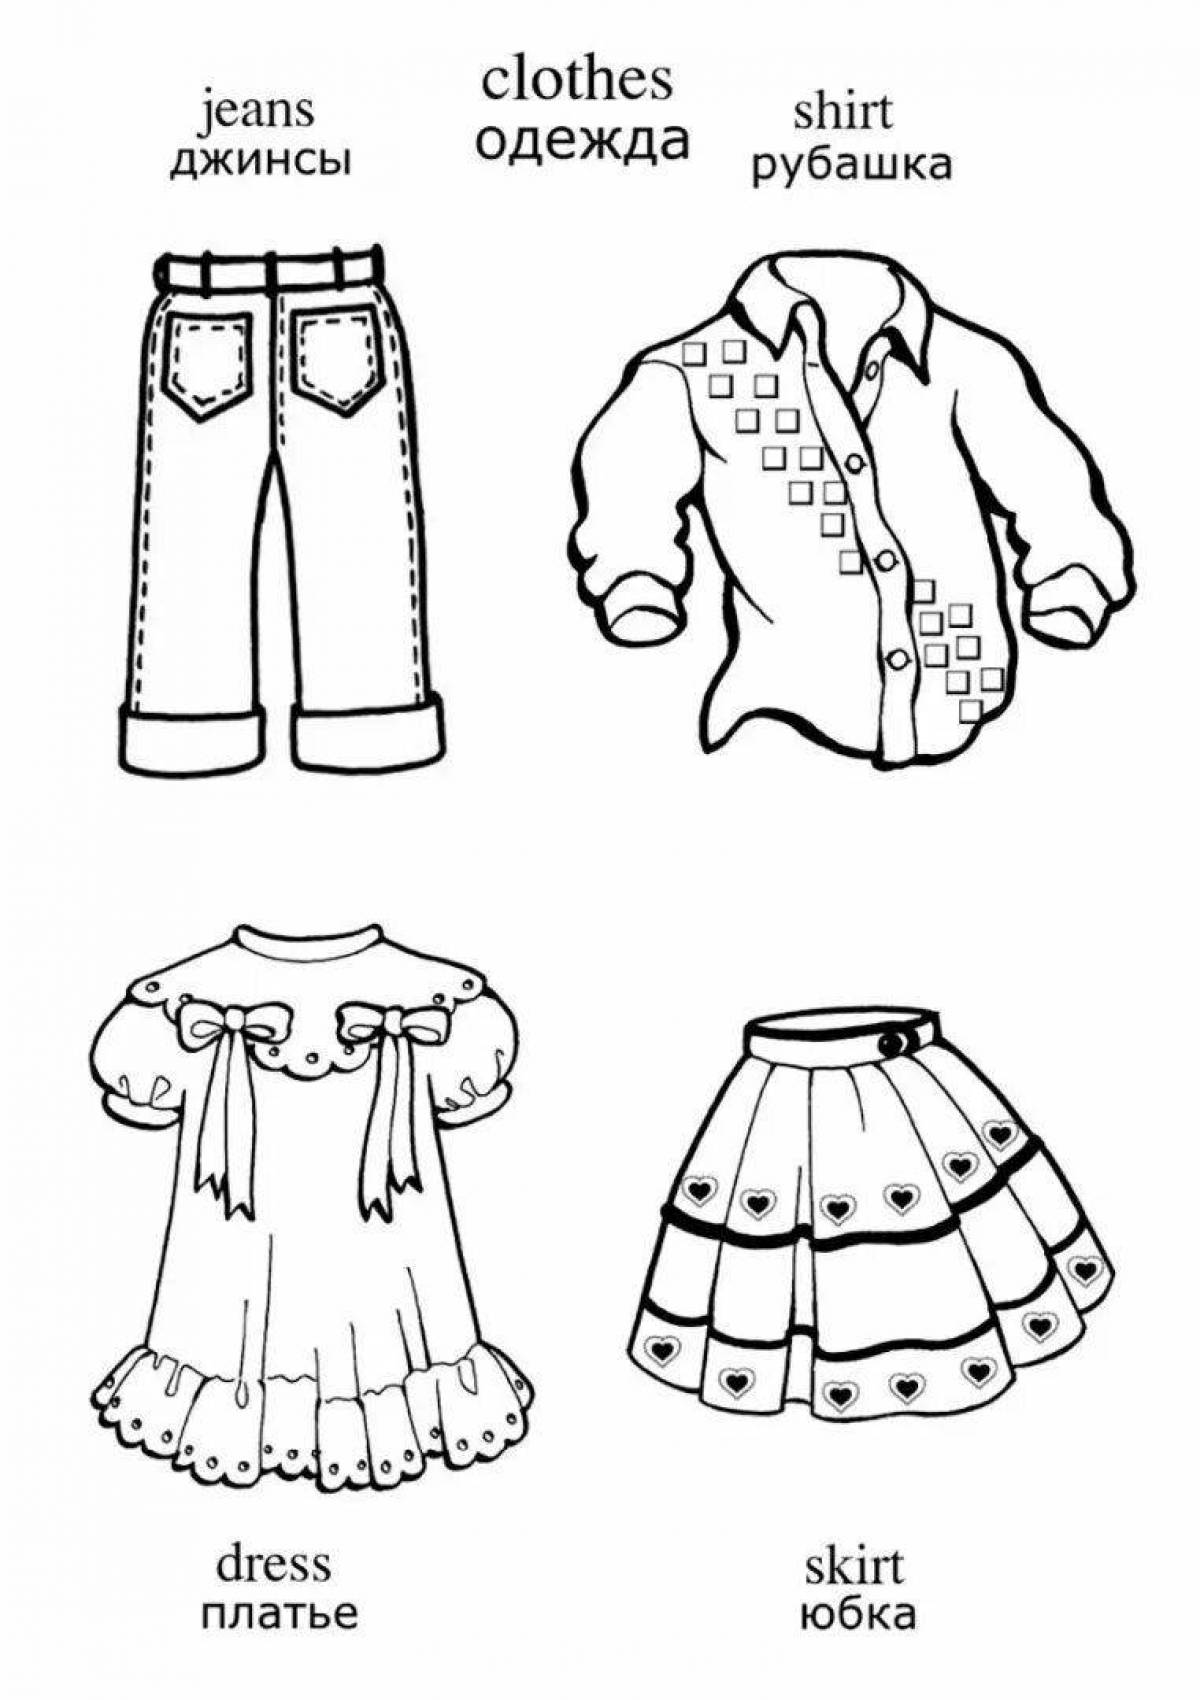 Crazy clothes coloring book for 6-7 year olds